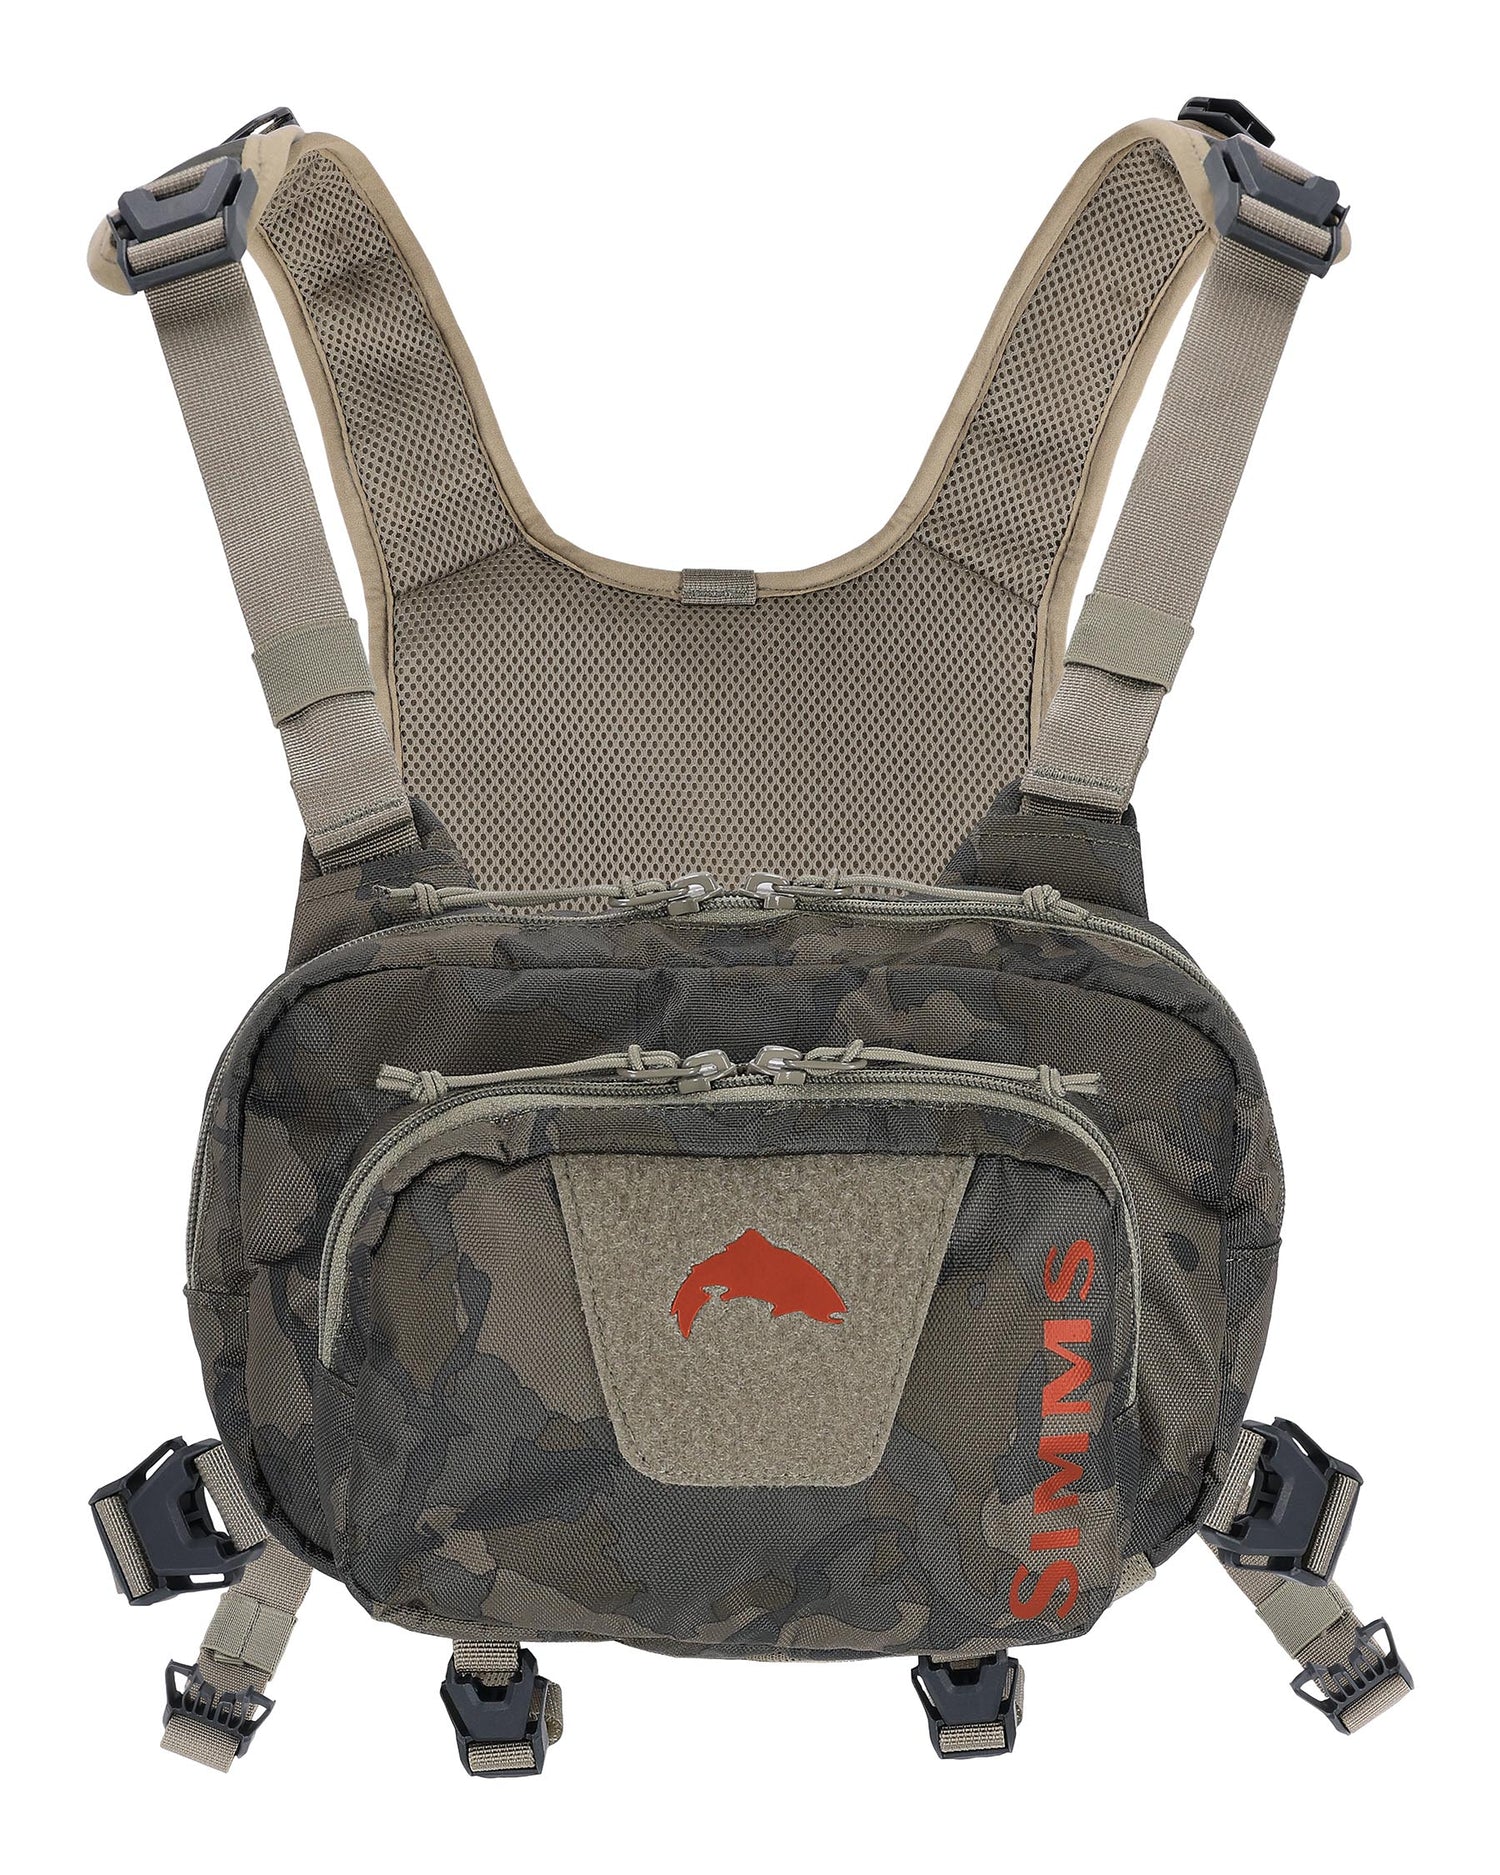 13792-1082-tributary-hybrid-chest-pack-tabletop-